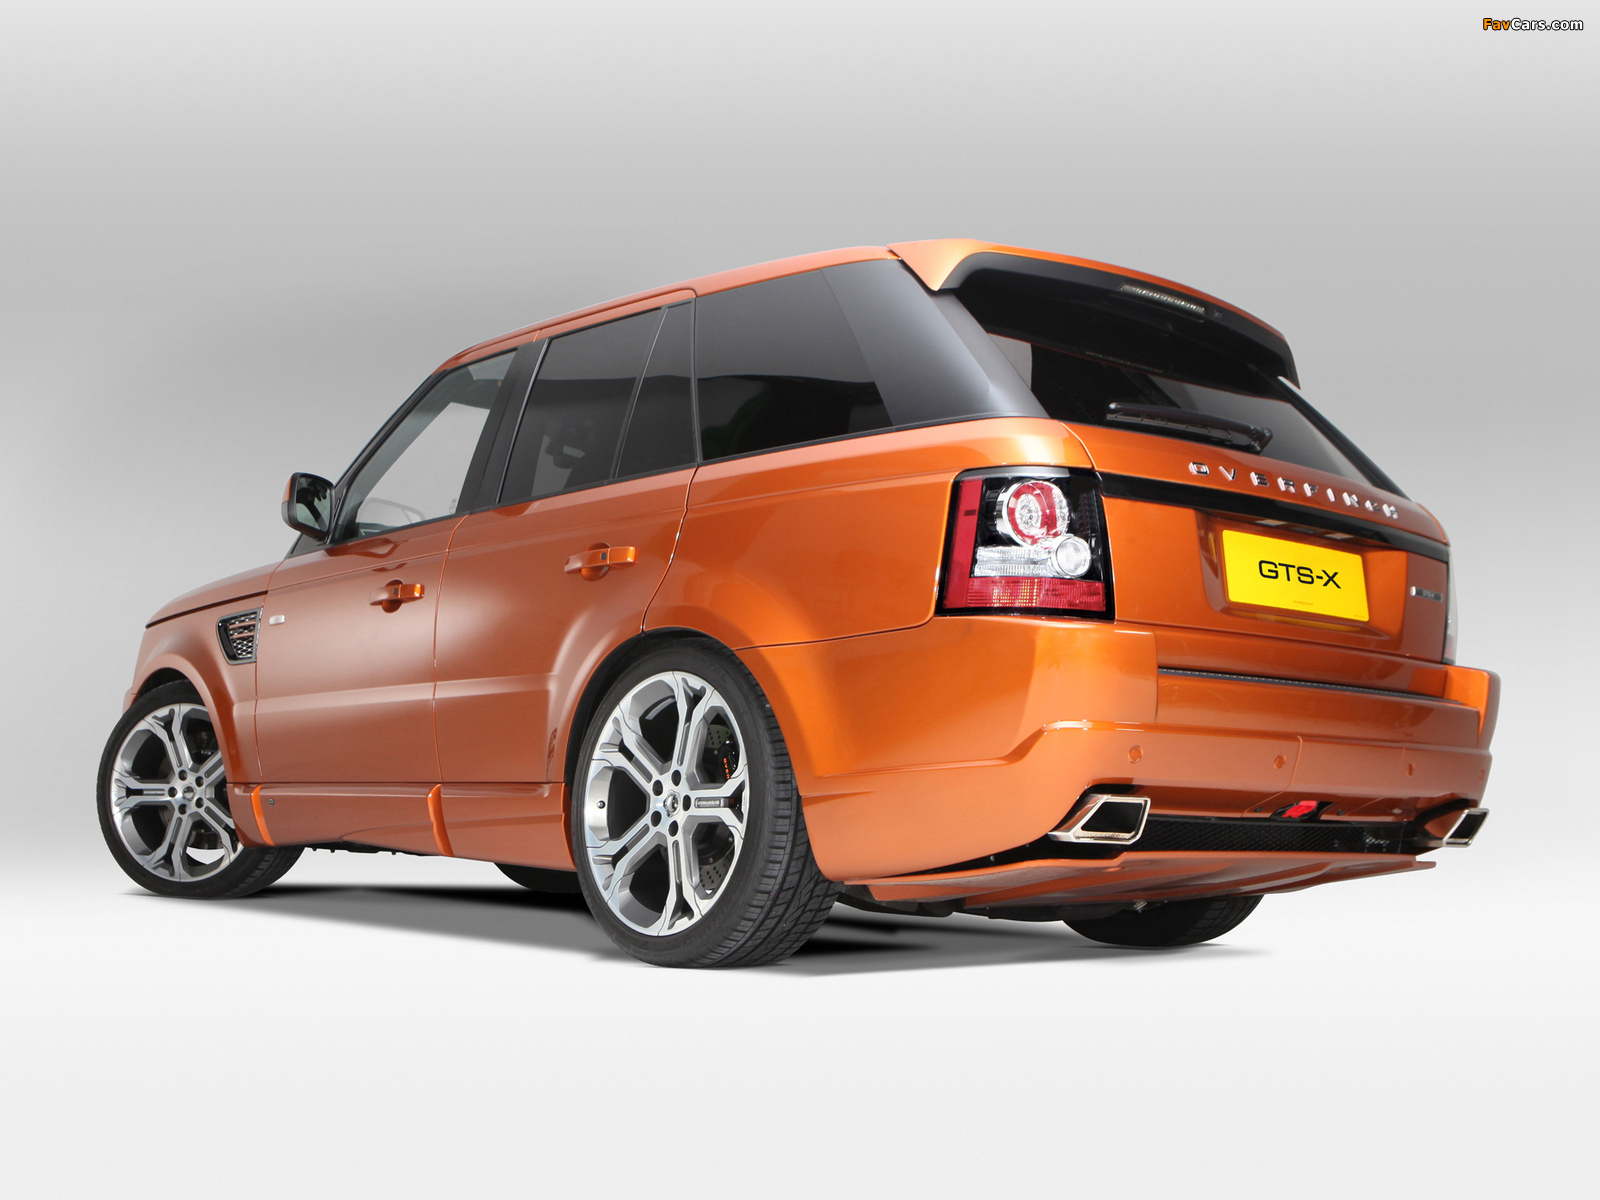 Overfinch Range Rover Sport GTS-X 2012 images (1600 x 1200)